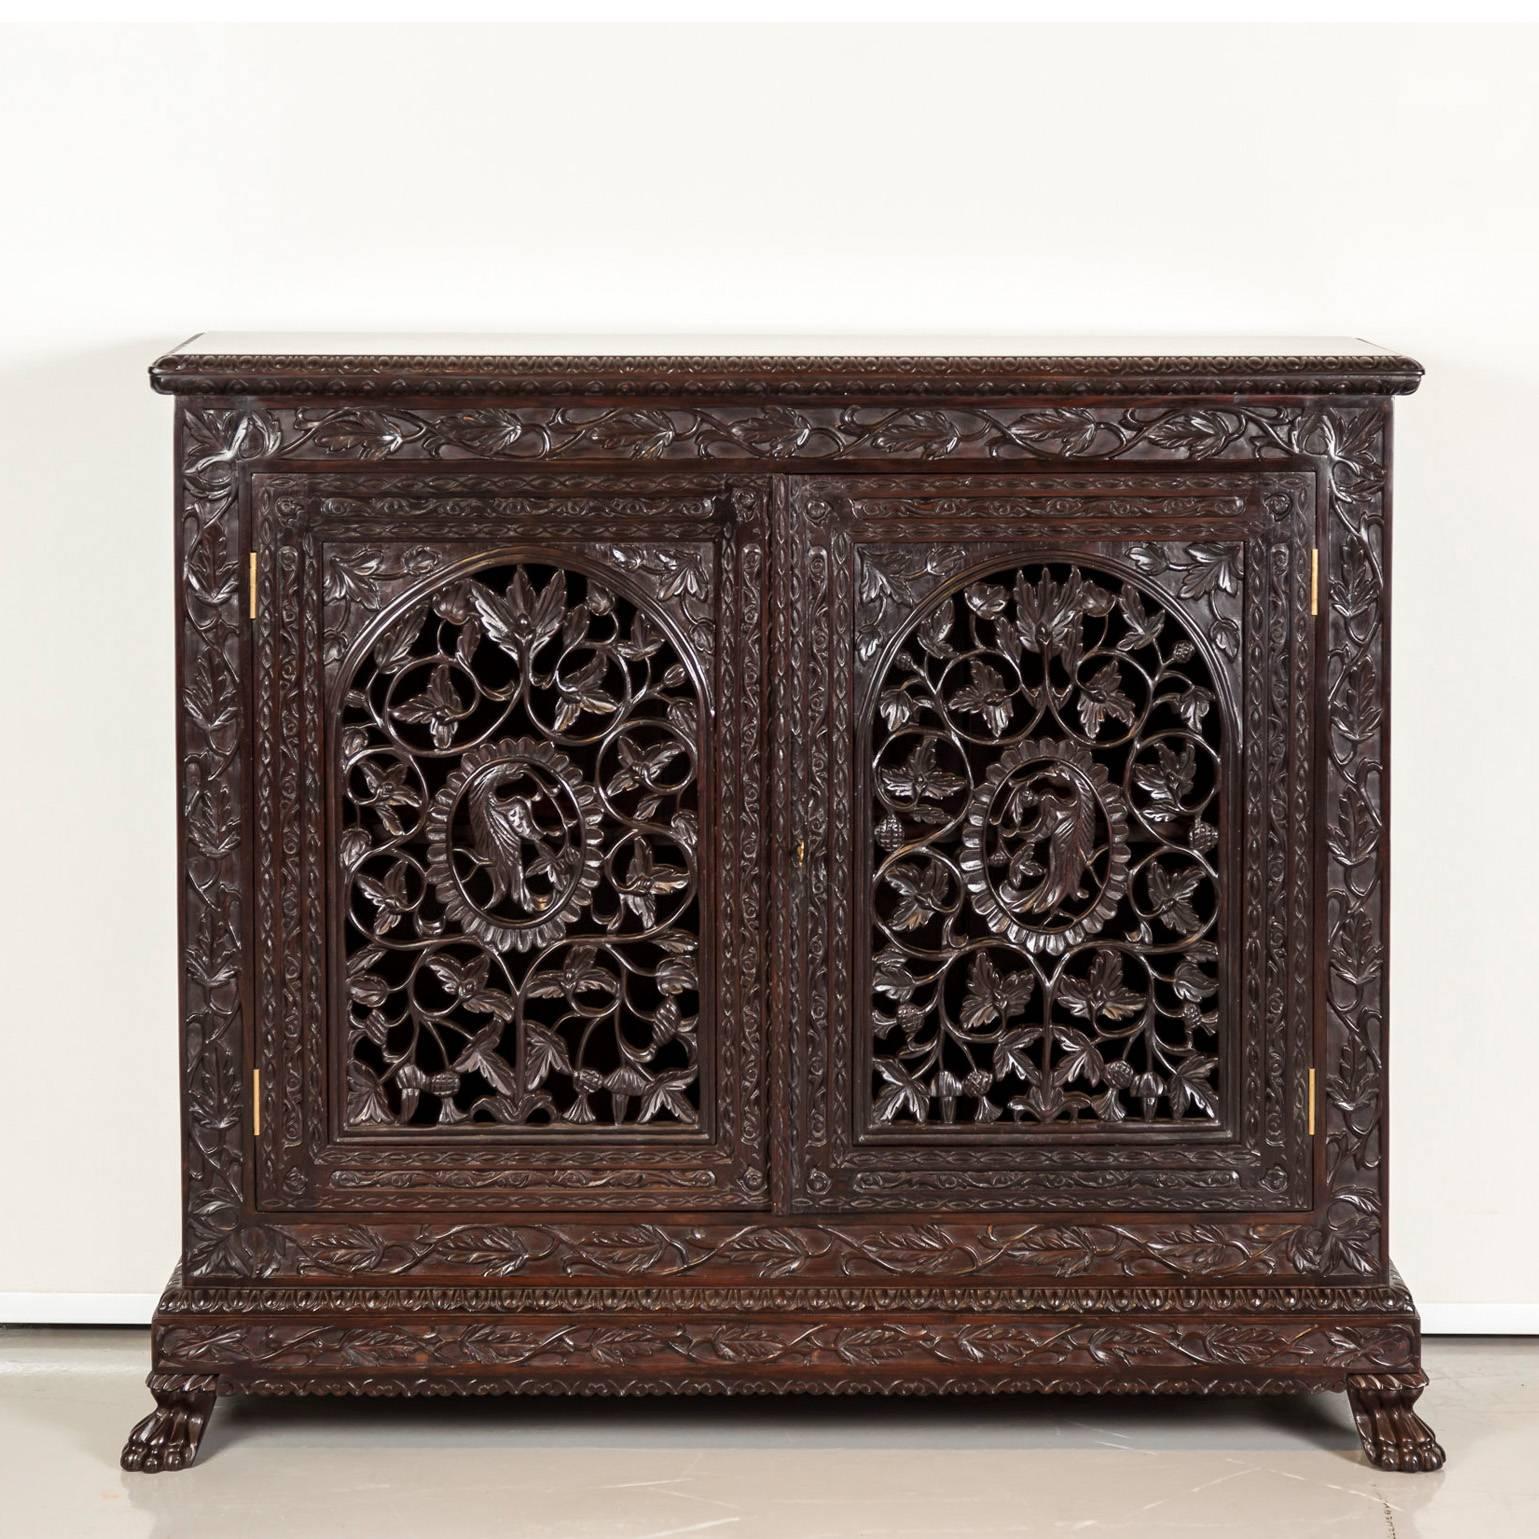 A fine, beautifully carved British colonial cabinet in rosewood. 
The overhanging top made of one piece of rosewood with a carved border. The front is mounted with hinged doors that are intricately pierced and carved with an intertwining floral